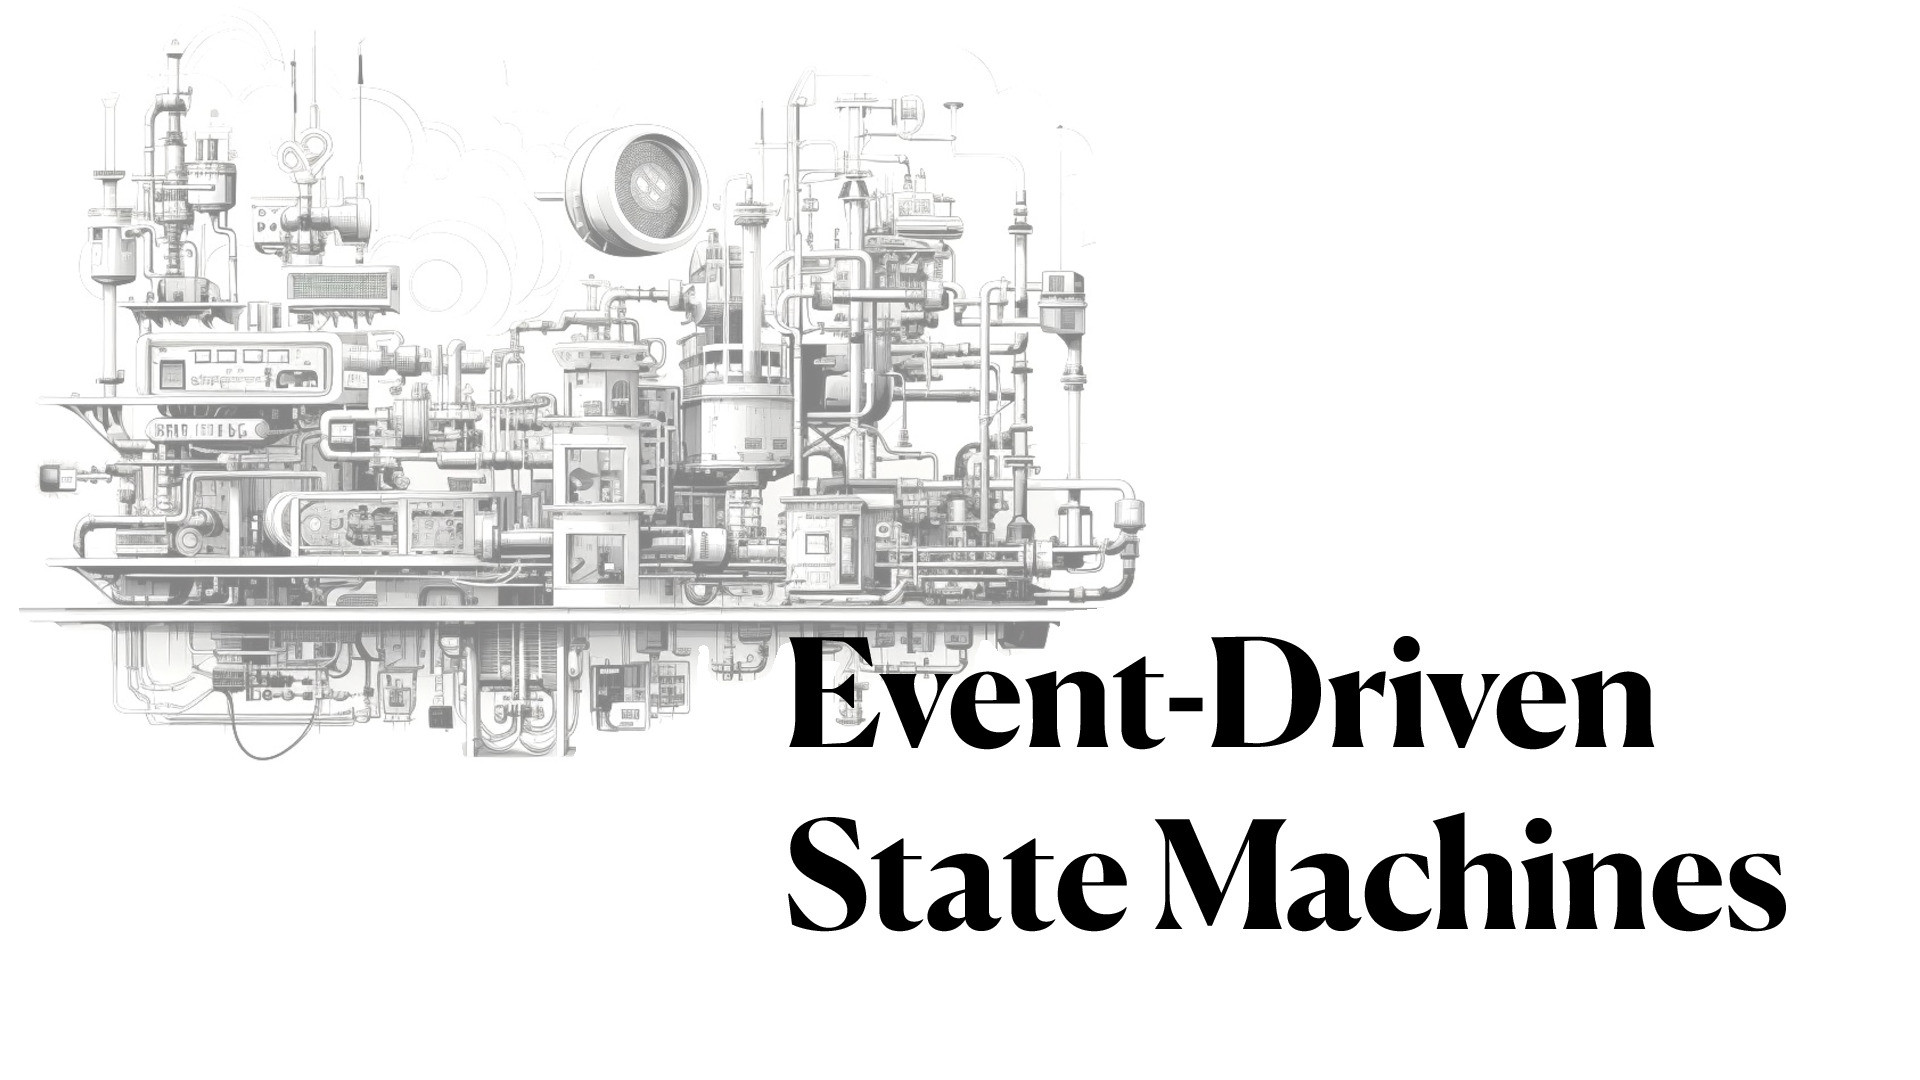 Event-Driven State Machines